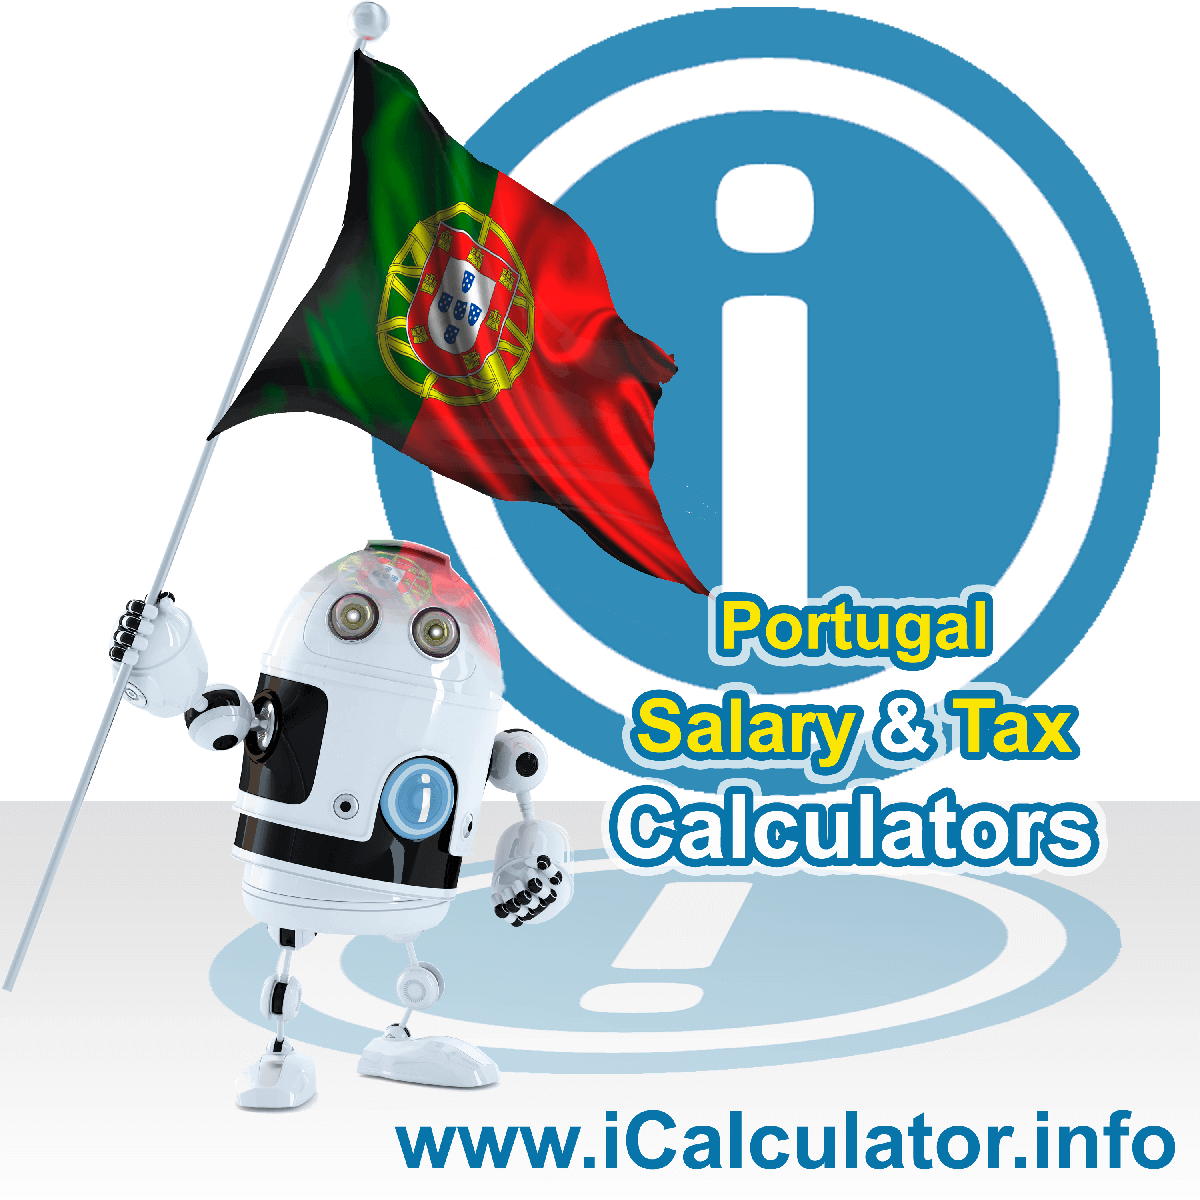 Portugal Wage Calculator. This image shows the Portugal flag and information relating to the tax formula for the Portugal Tax Calculator